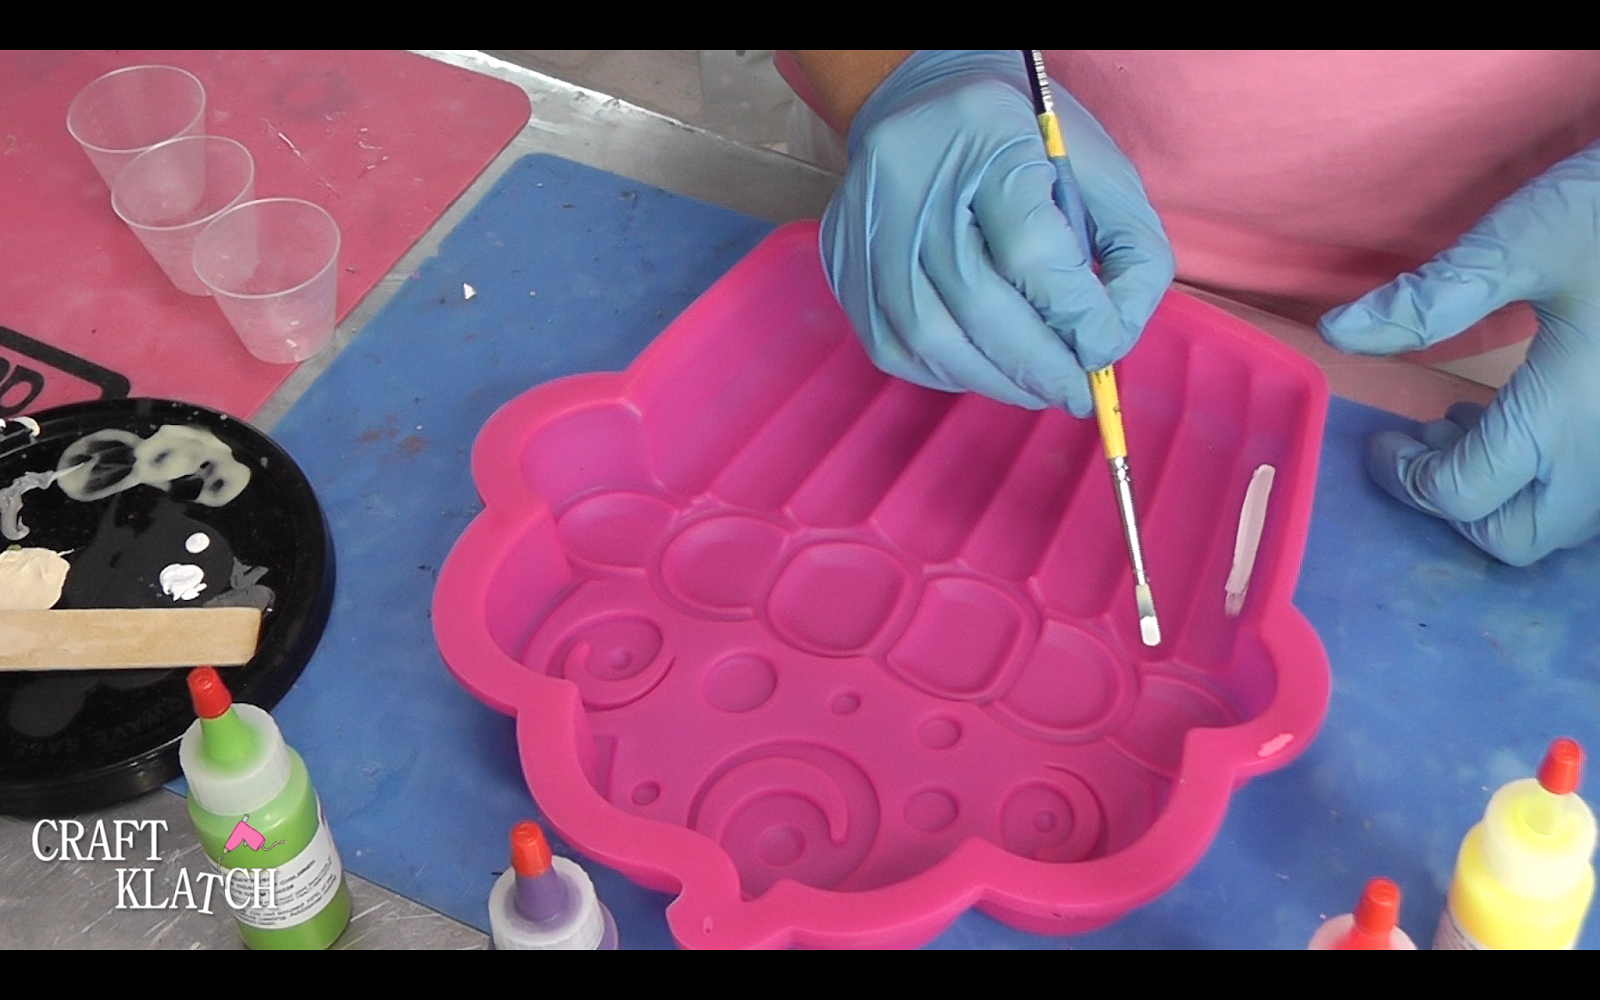 The Simple Steps To Casting Resin In Silicone Molds - Resin Obsession